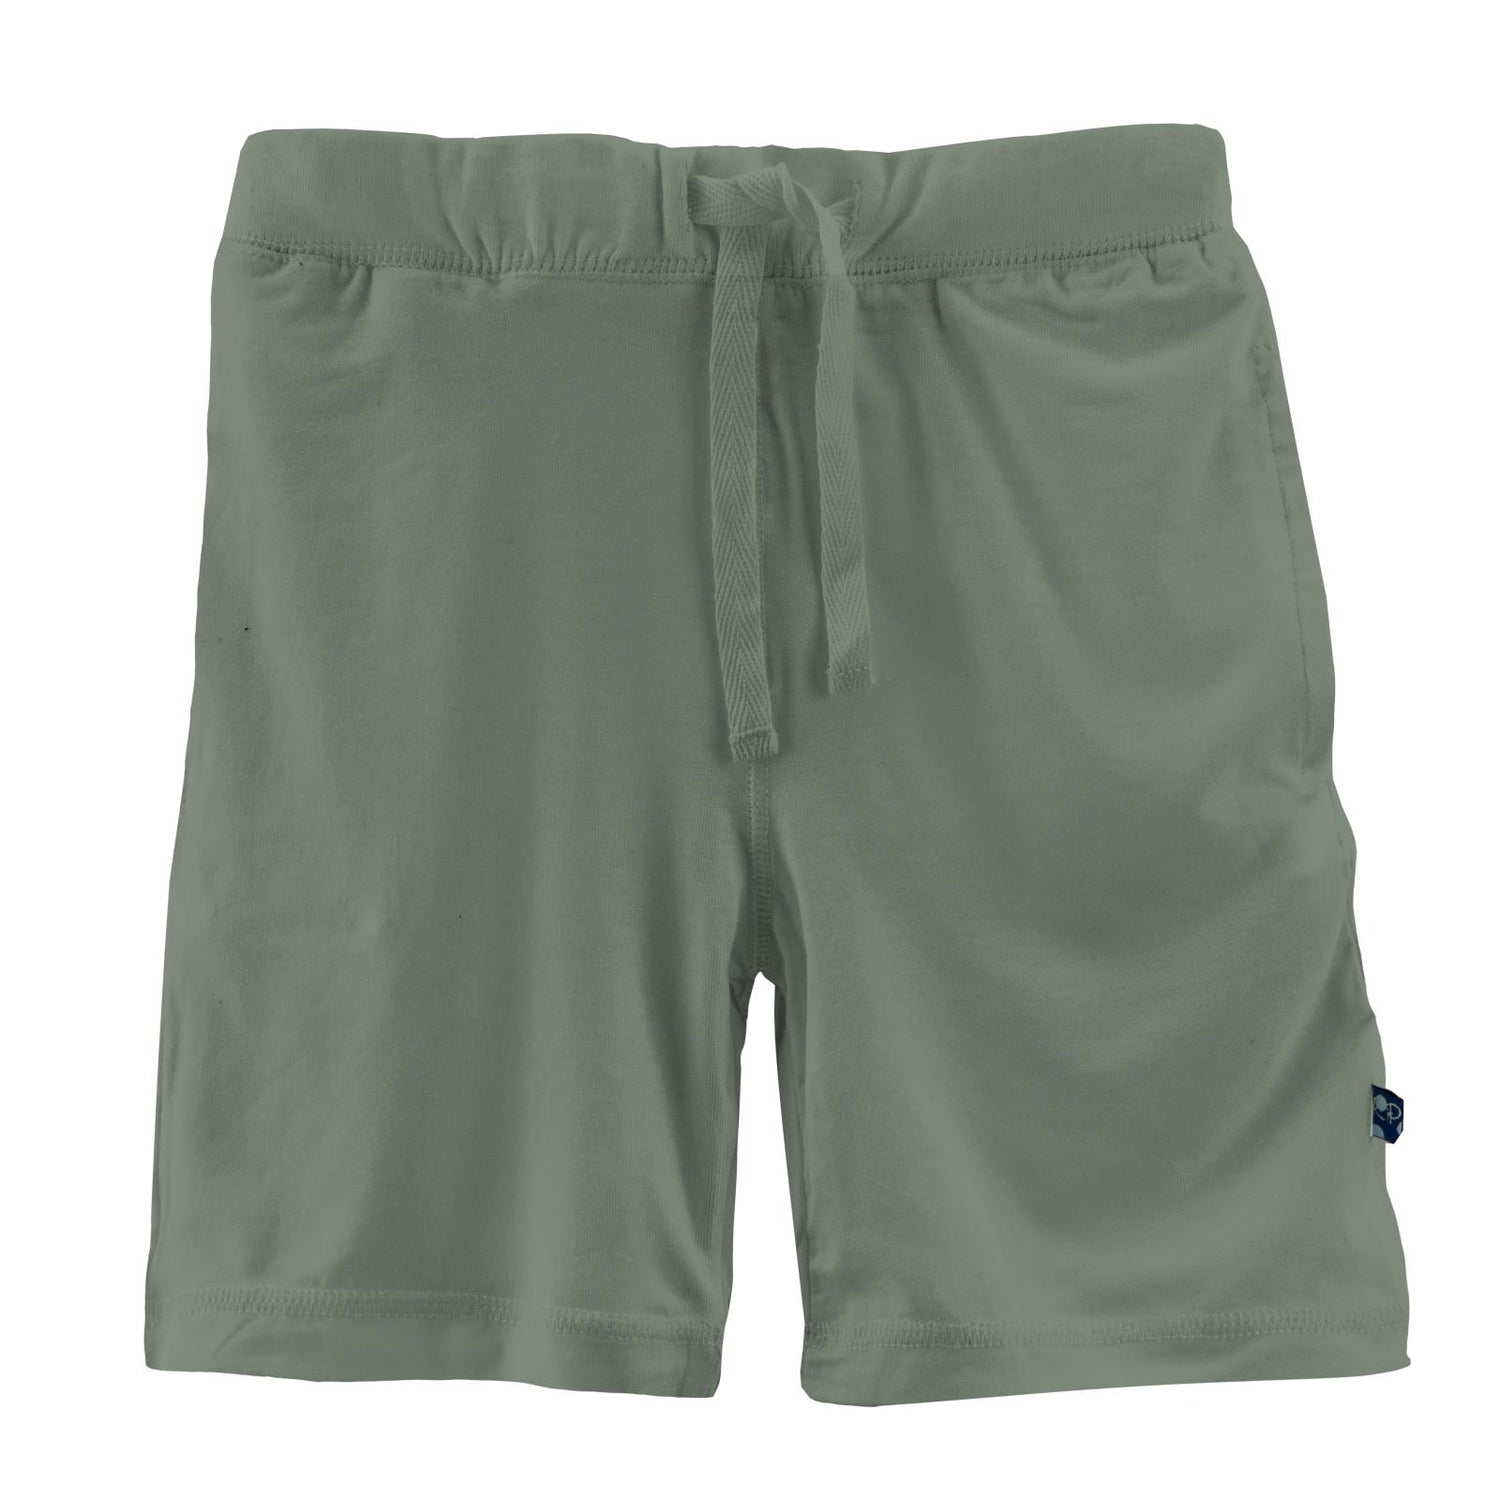 Lightweight Drawstring Shorts in Lily Pad